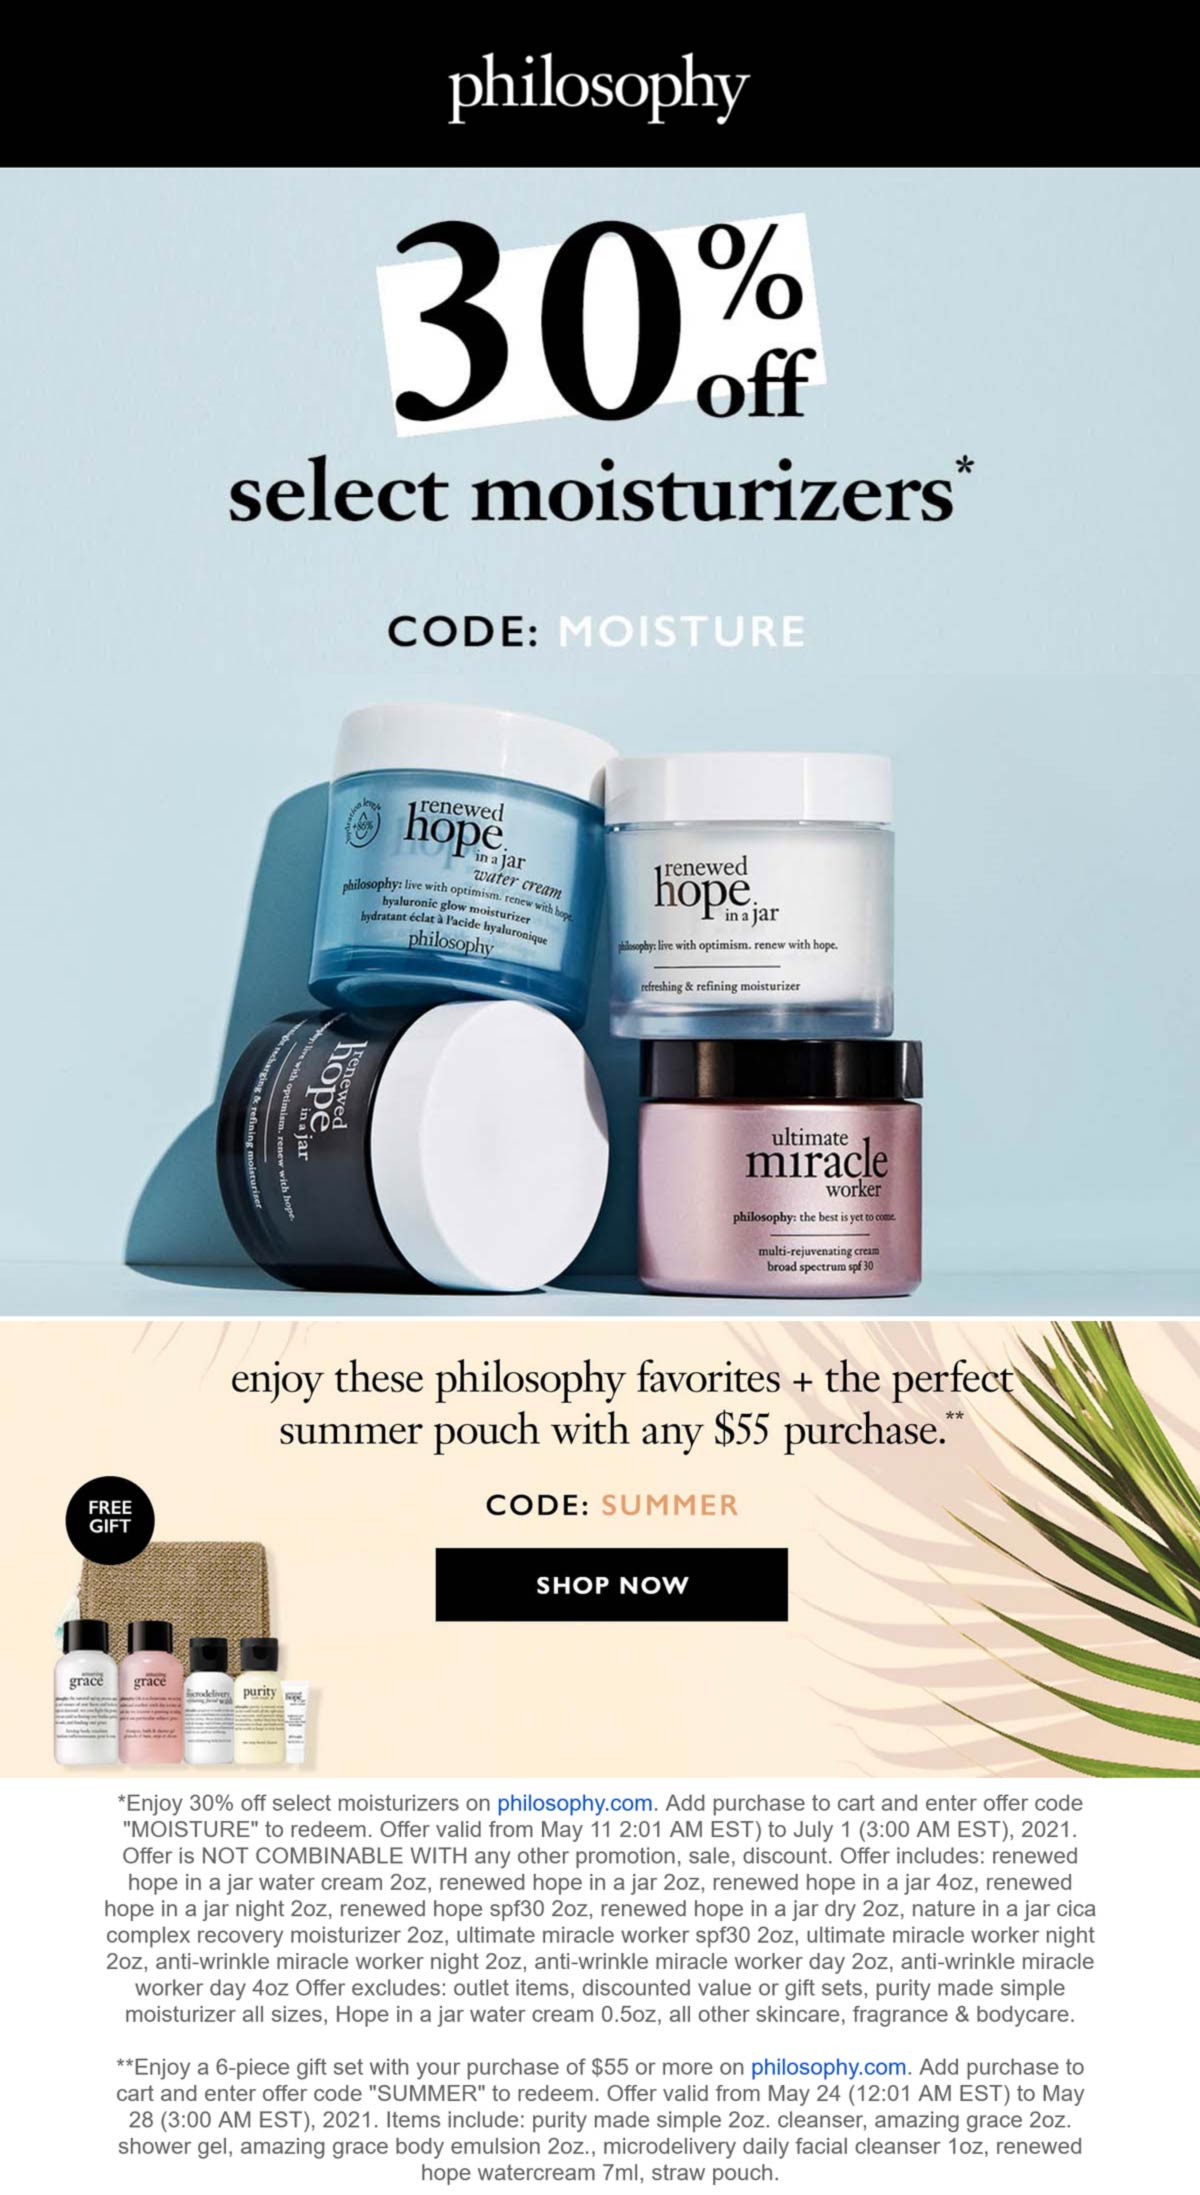 Philosophy stores Coupon  30% off moisturizers + free 6pc kit with $55 spent at Philosophy via promo code SUMMER #philosophy 